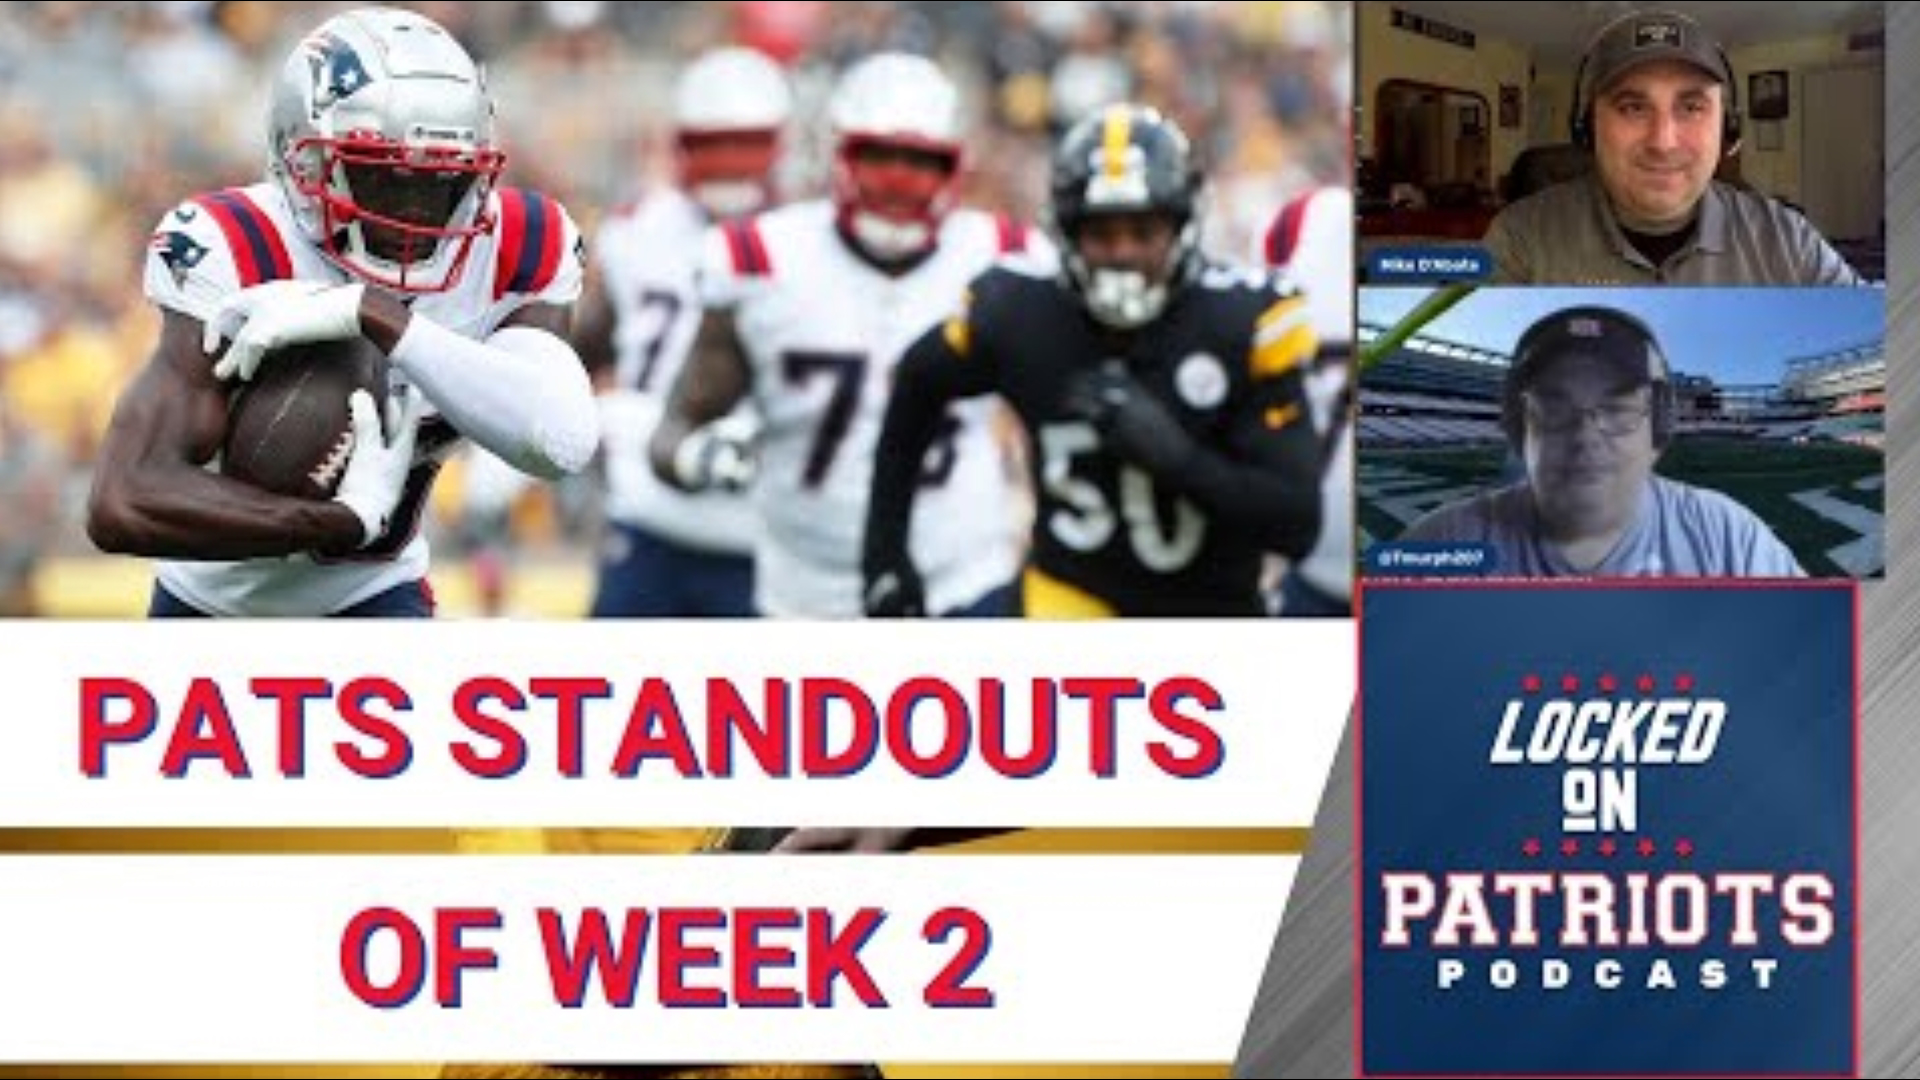 As the New England Patriots continue to savor their 17-14 victory over the Pittsburgh Steelers in Week 2, they already have their eye on Week 3.